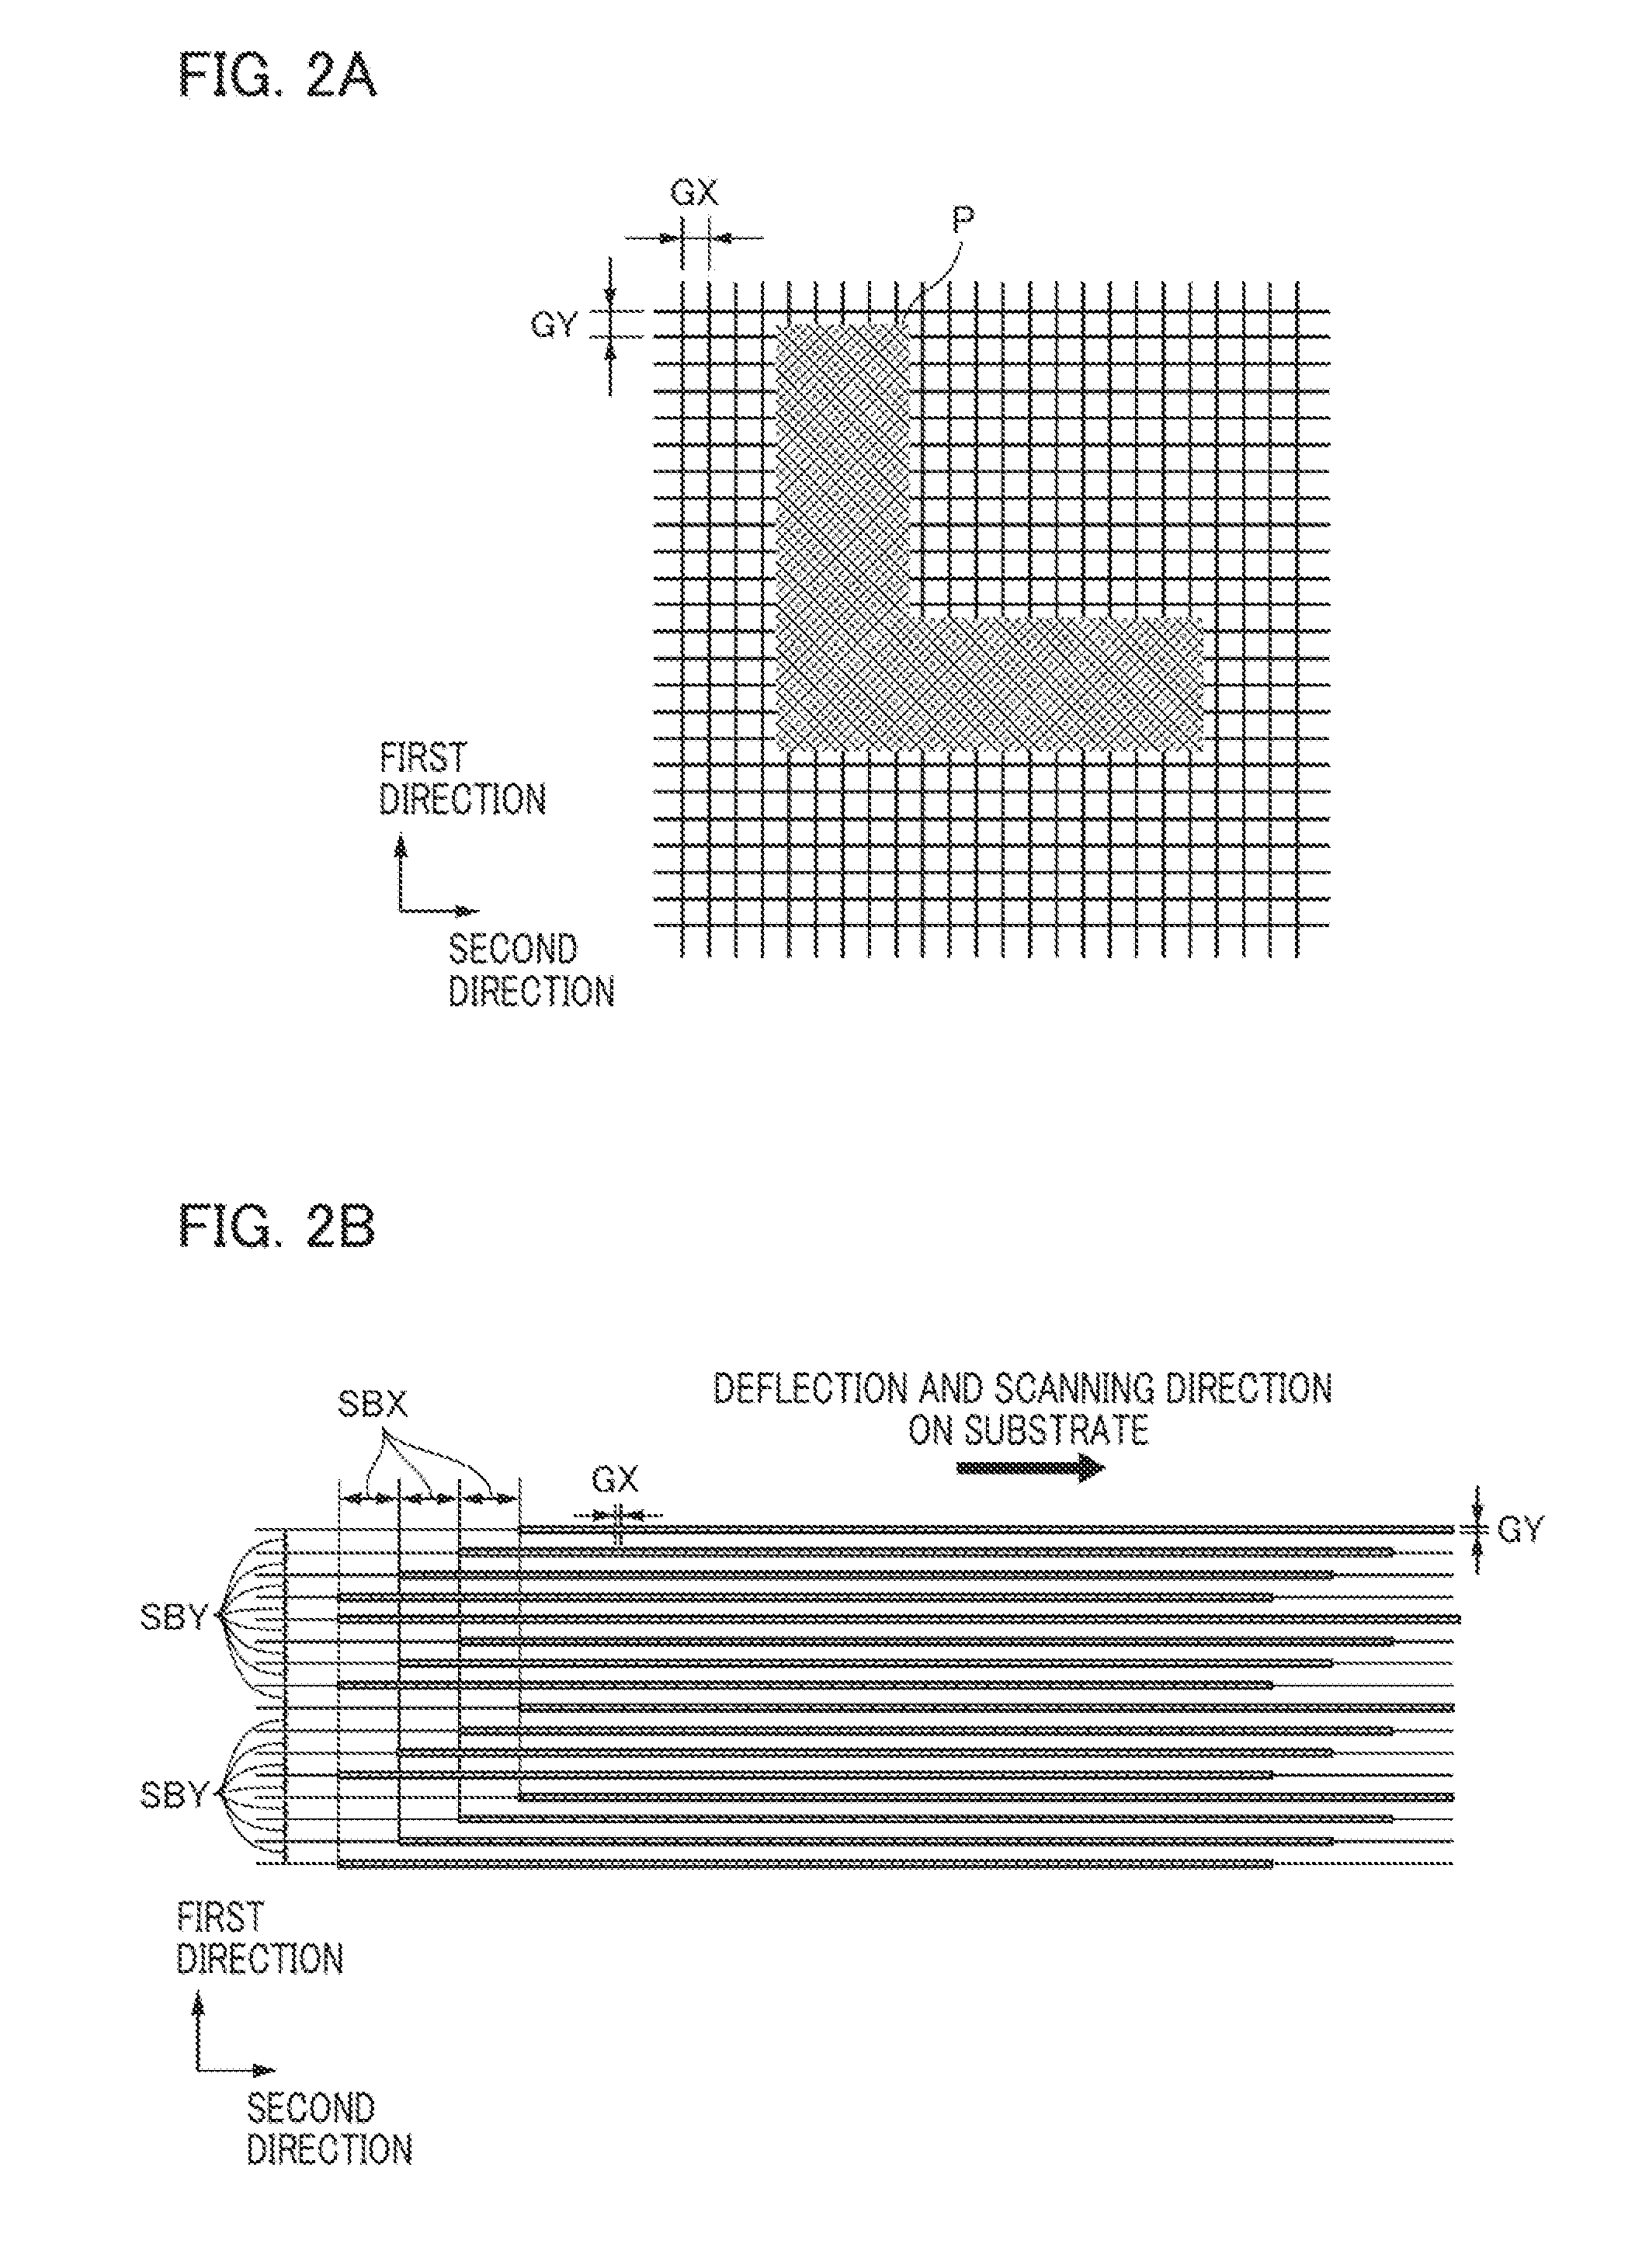 Lithography apparatus, and method of manufacture of product